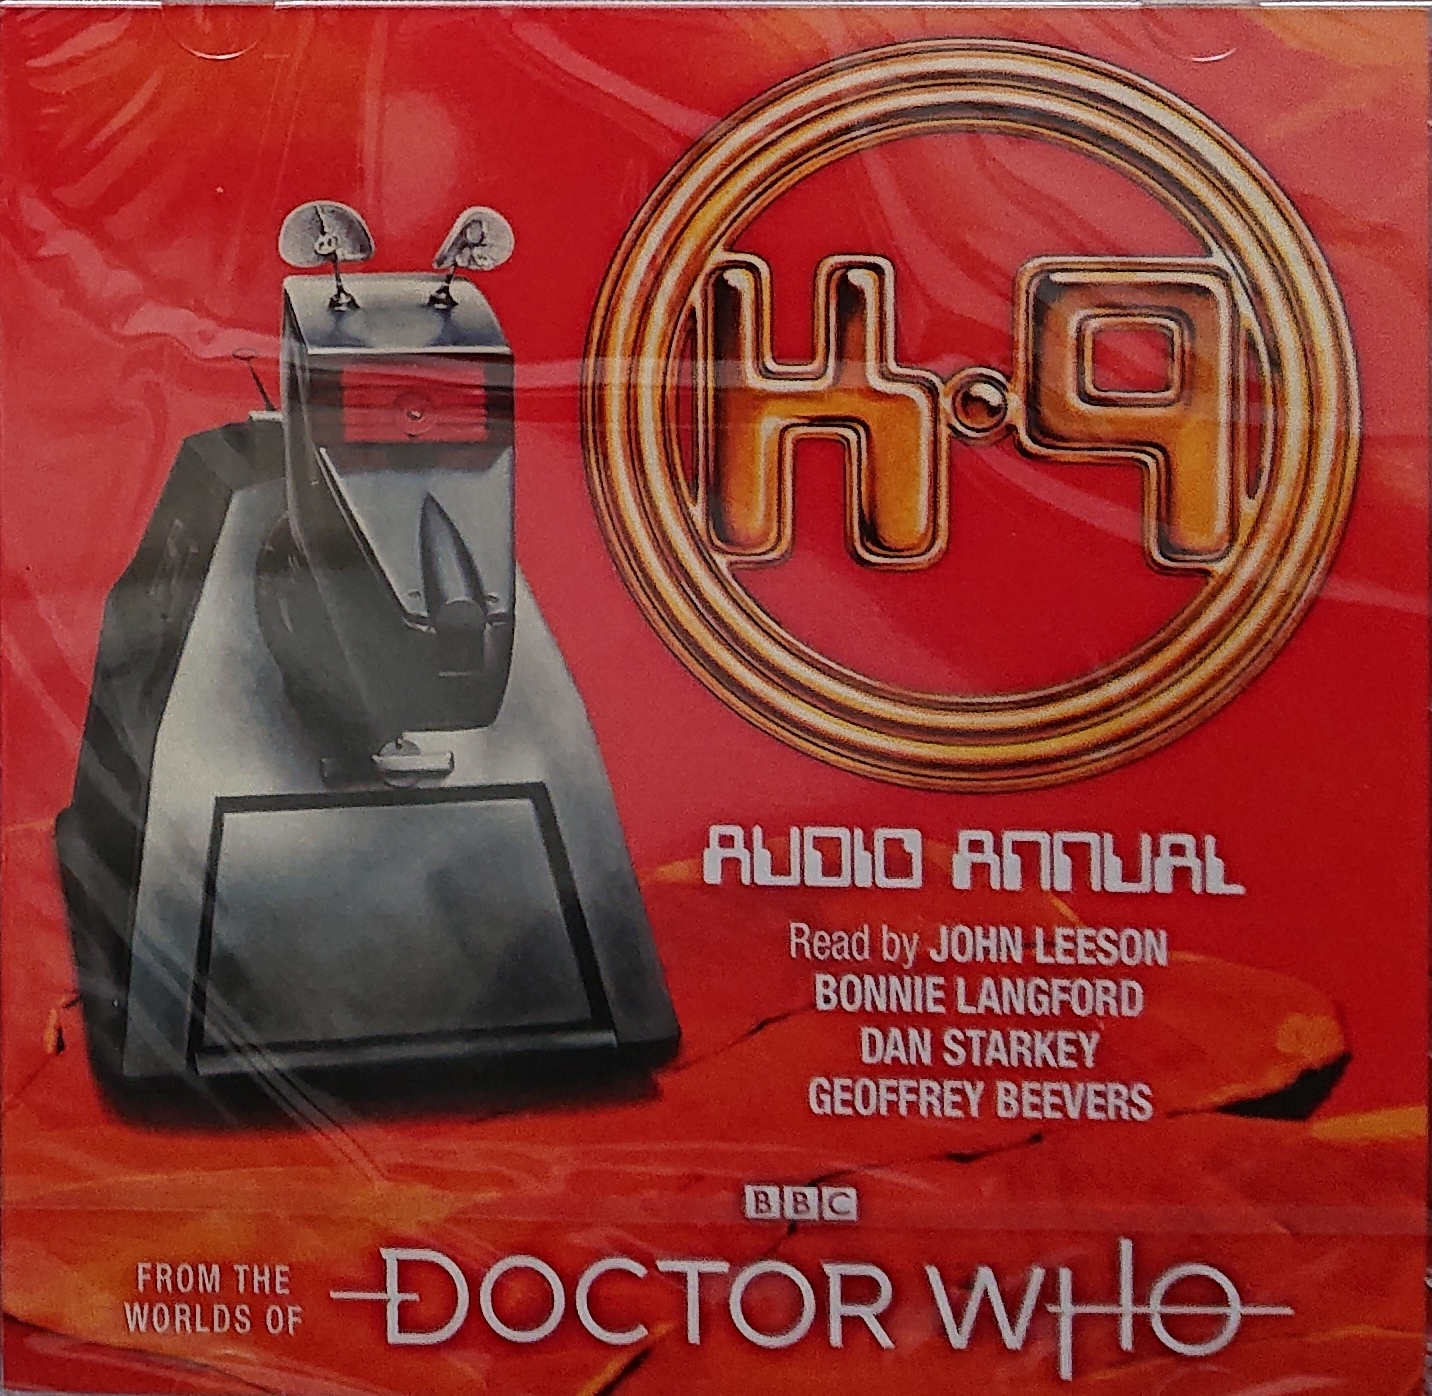 Picture of ISBN 978-1-52913-829-0 Doctor Who - Audio annual K-9 by artist Various from the BBC records and Tapes library